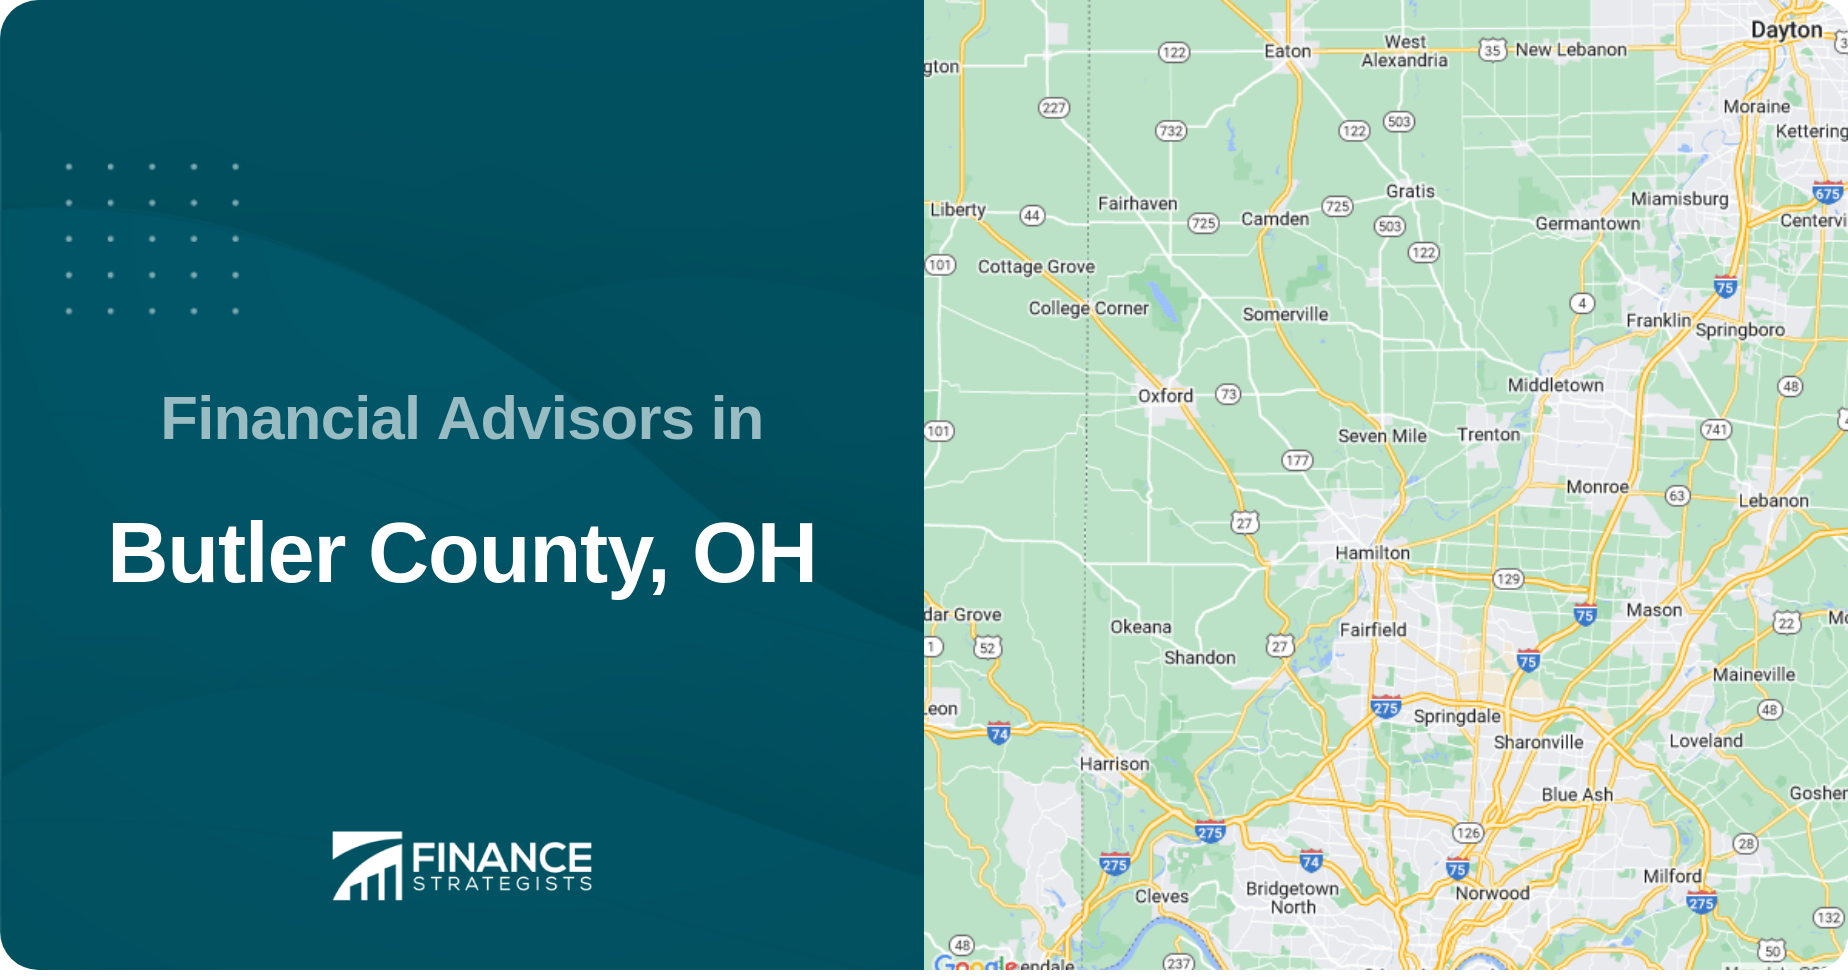 Financial Advisors in Butler County, OH